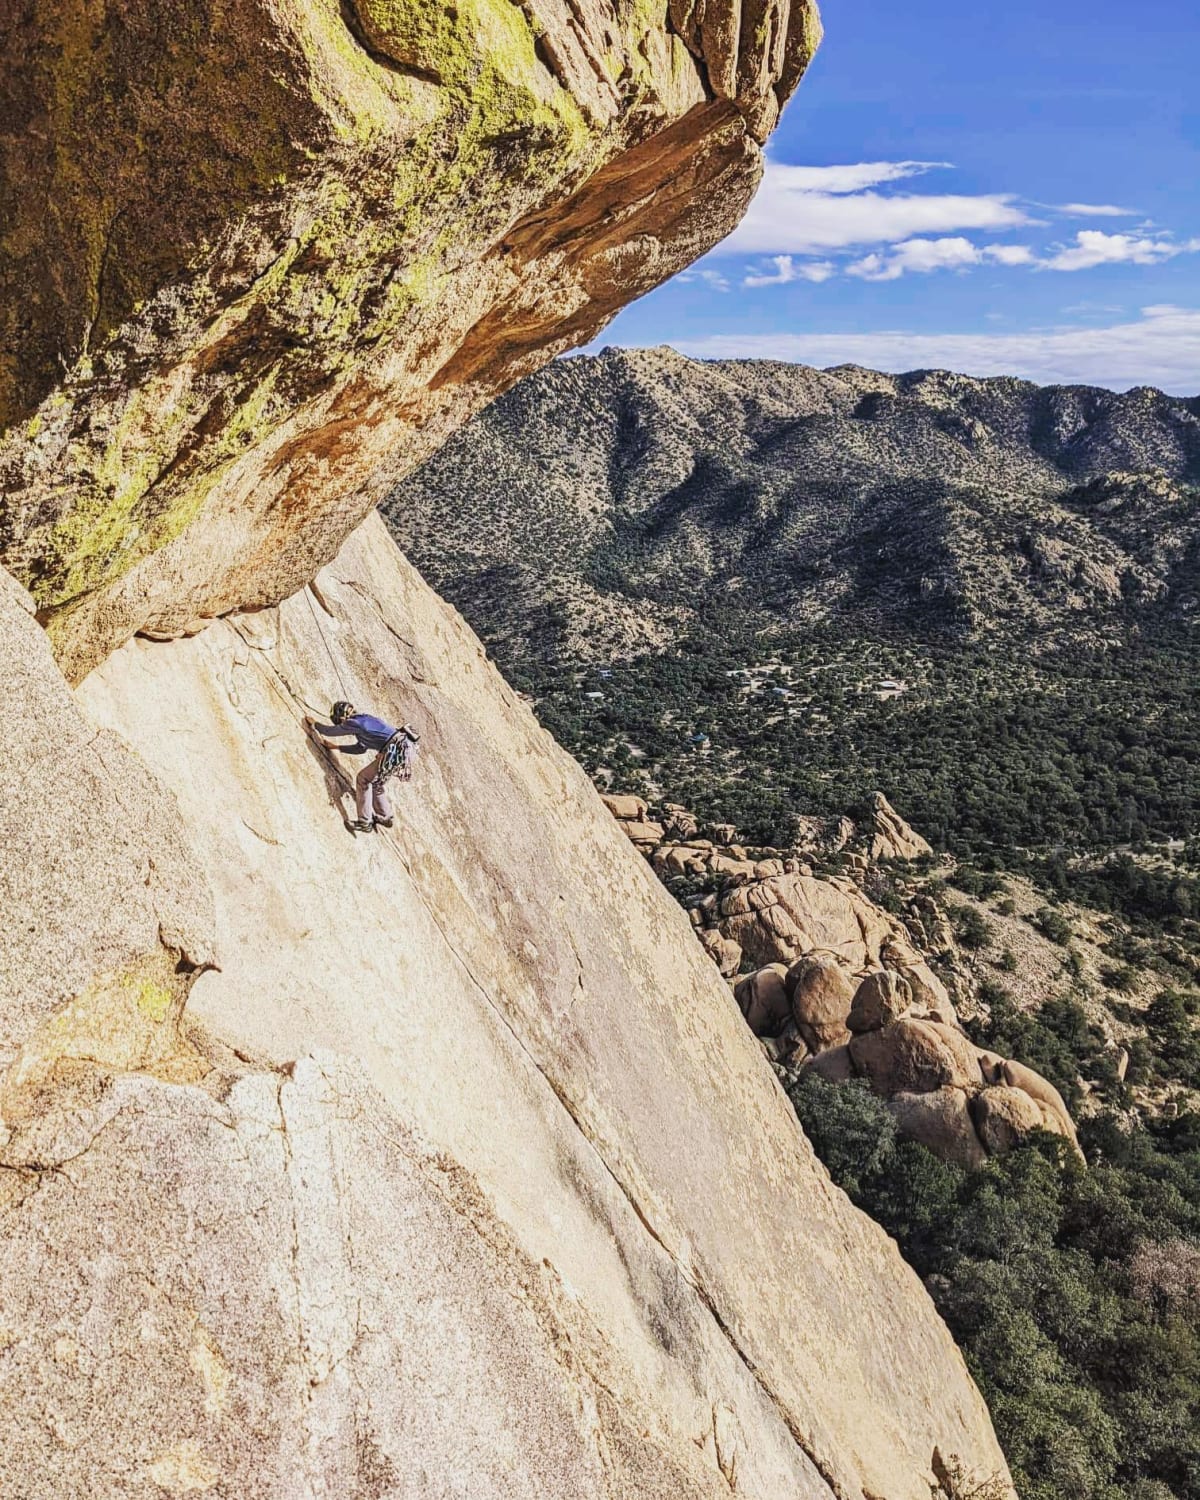 Cruxing out on The Beeline, East Cochise Stronghold, AZ. A d*** fine finger crack on slab.